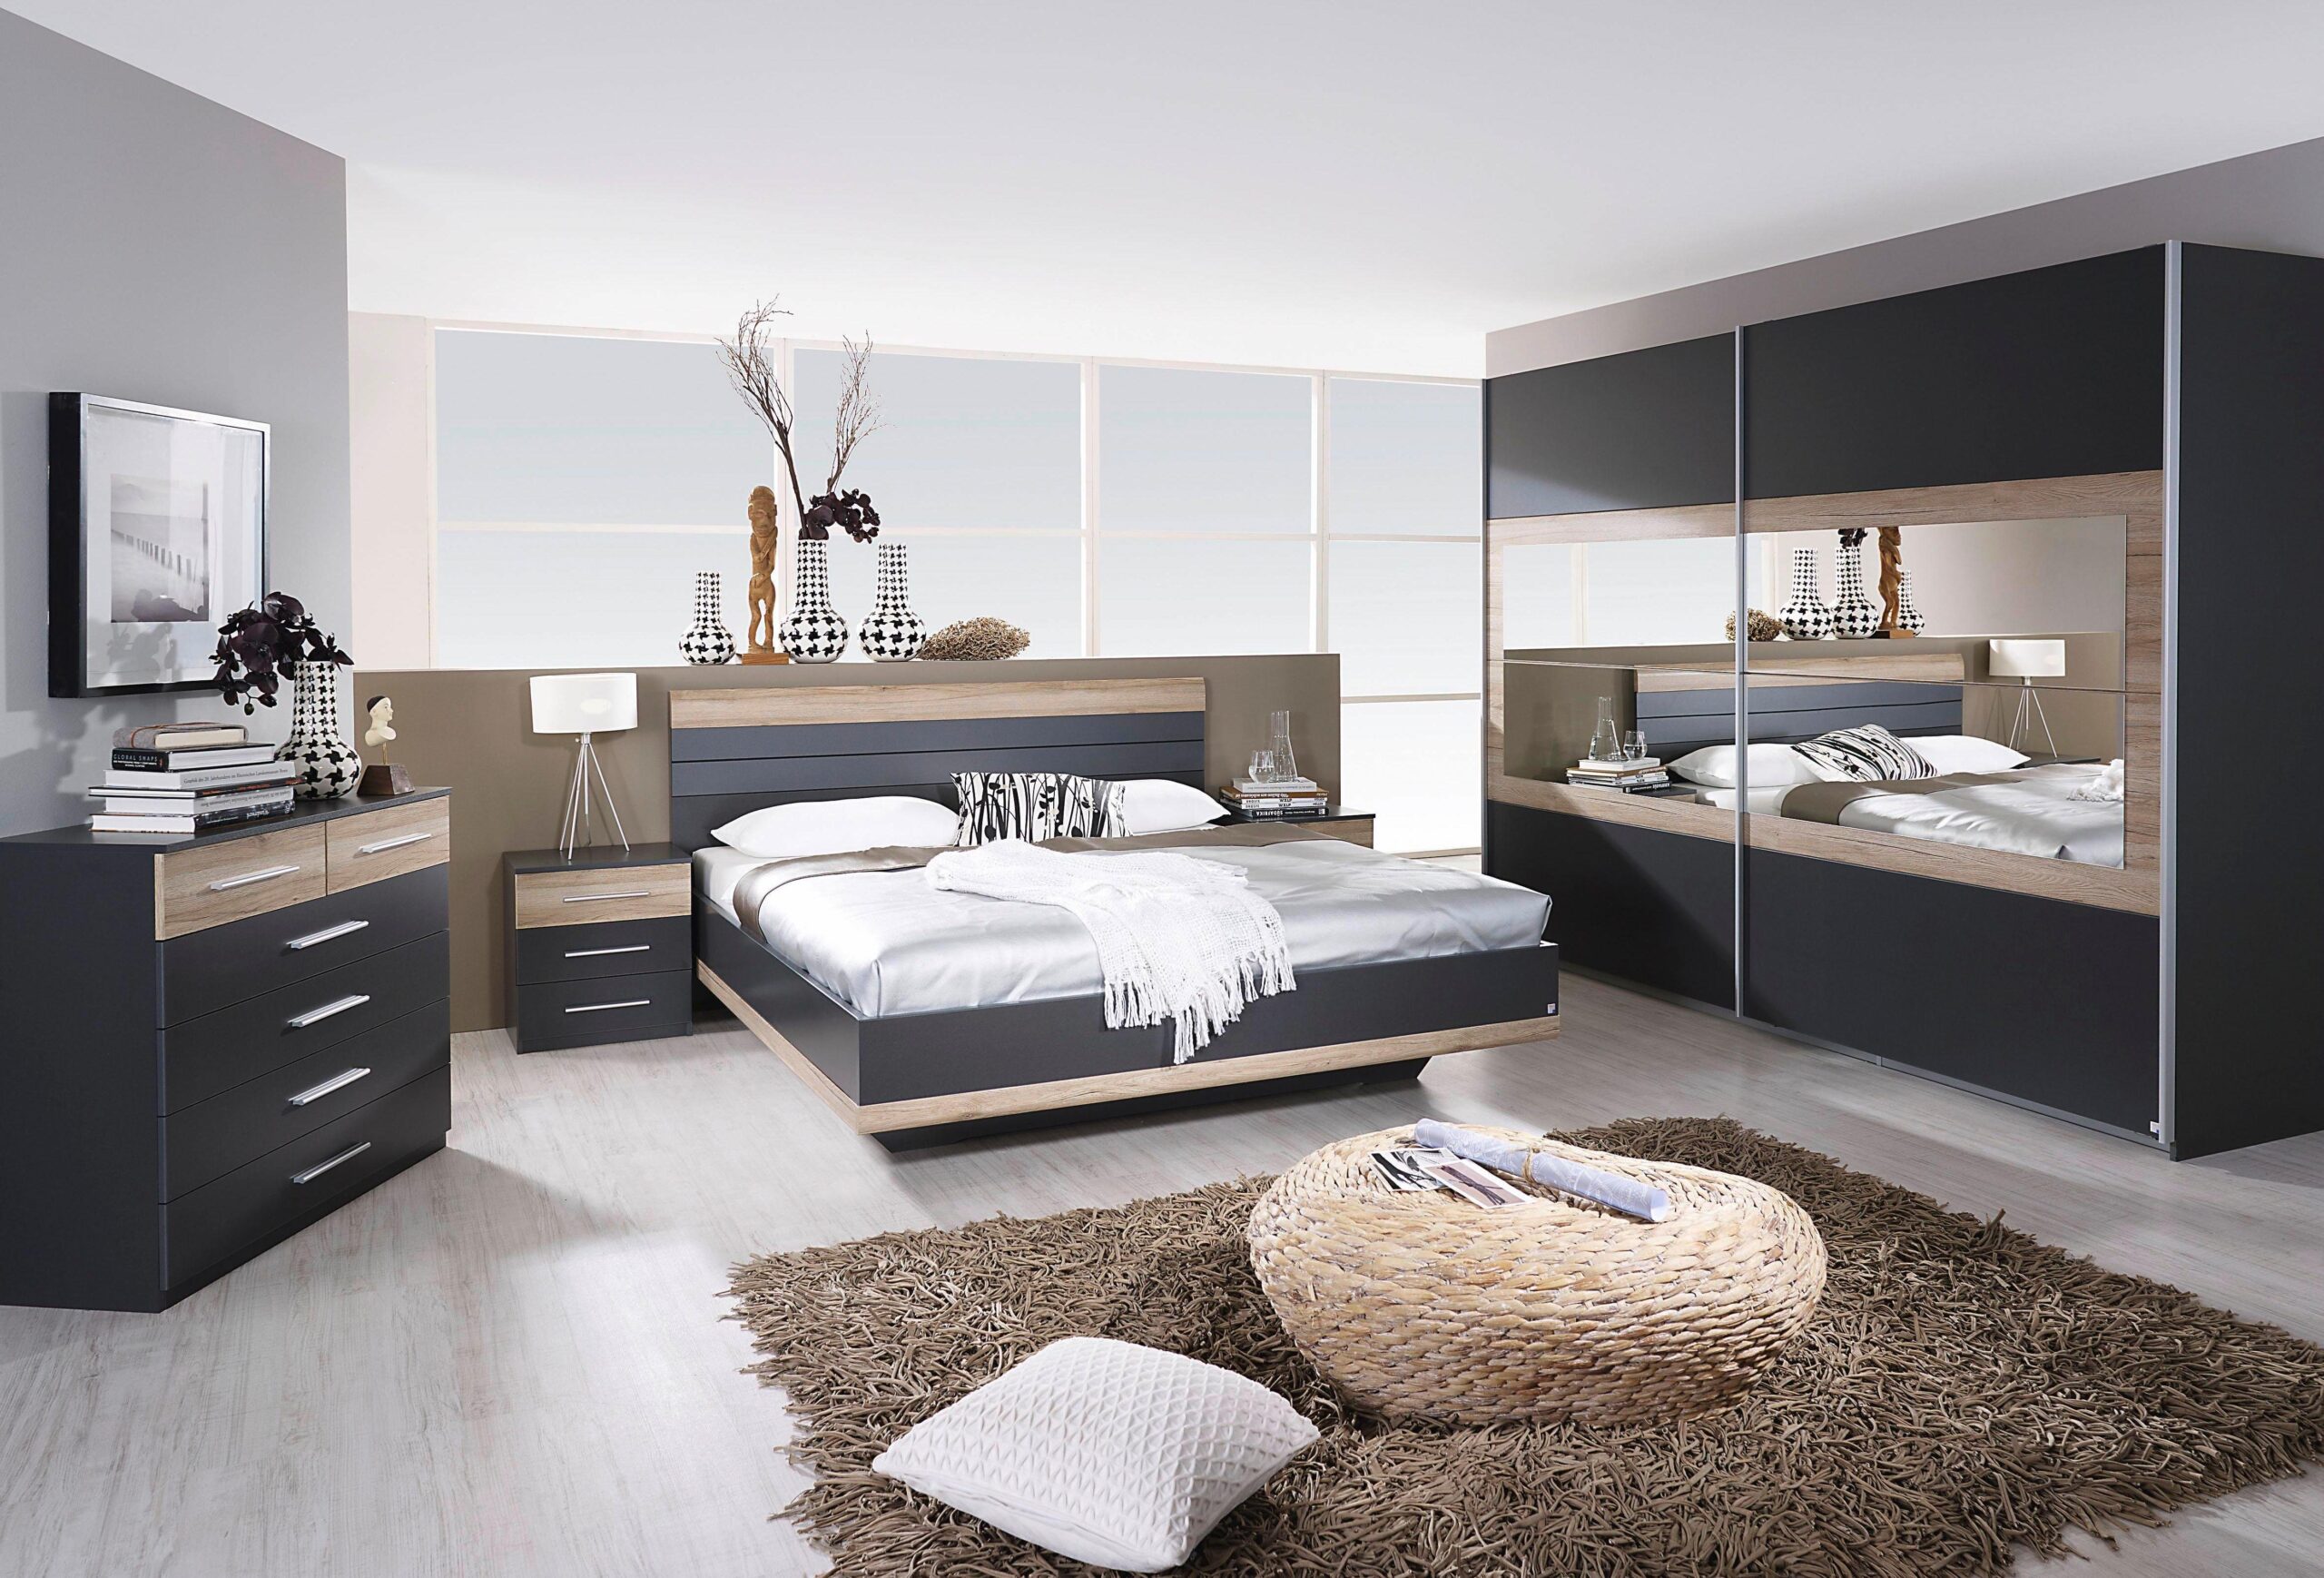 Complete bedroom sets for your new and modern lifestyle